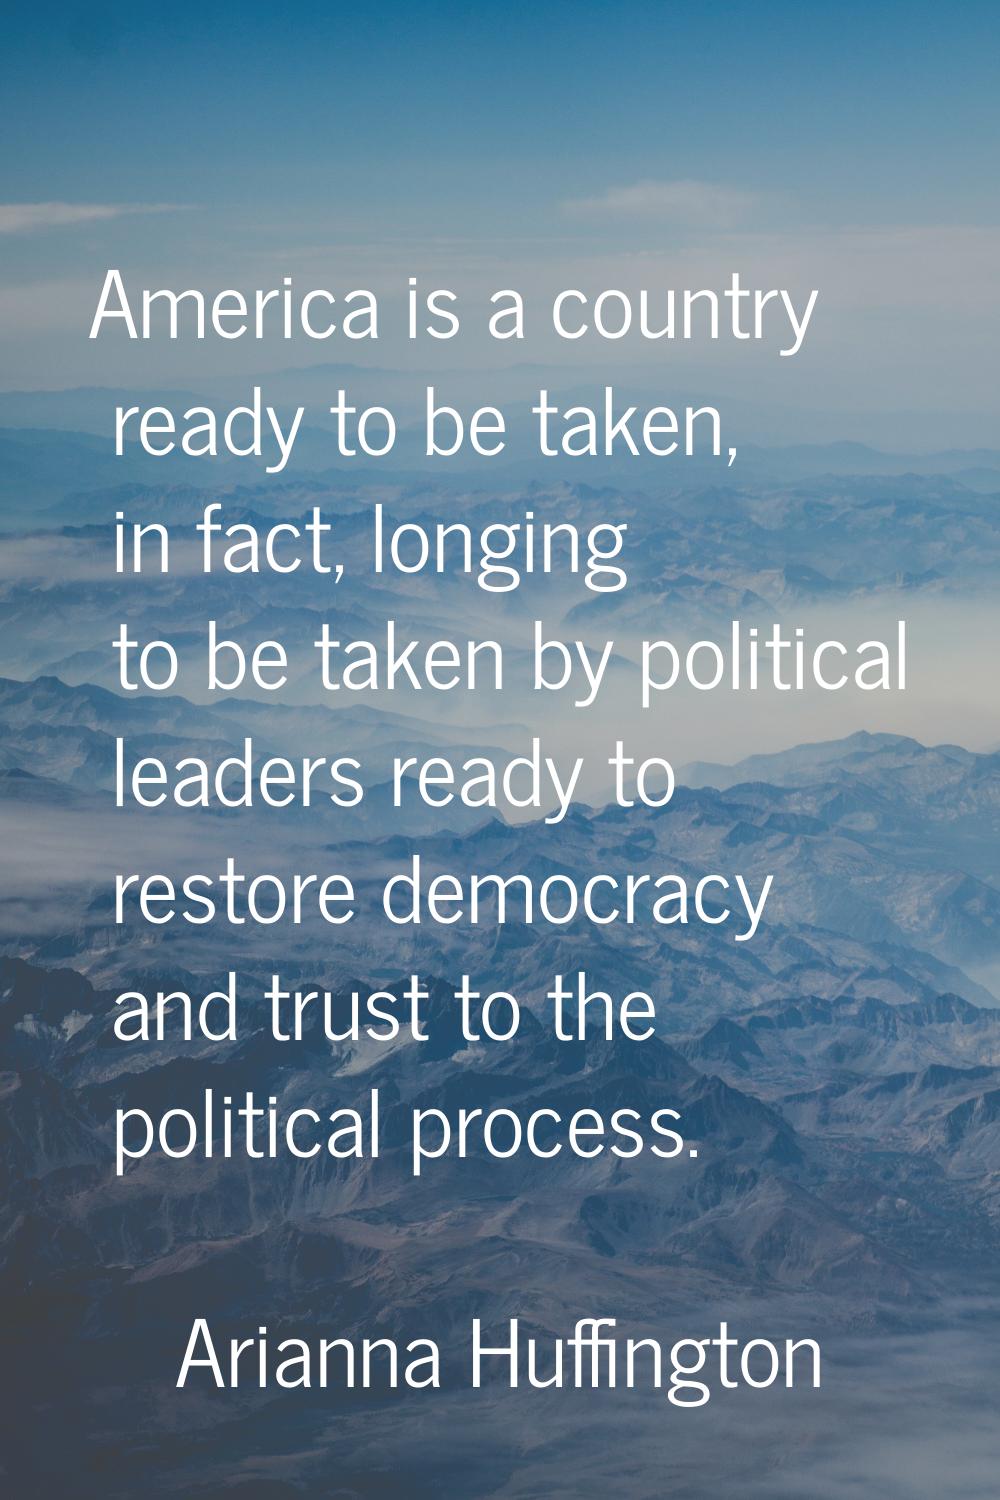 America is a country ready to be taken, in fact, longing to be taken by political leaders ready to 